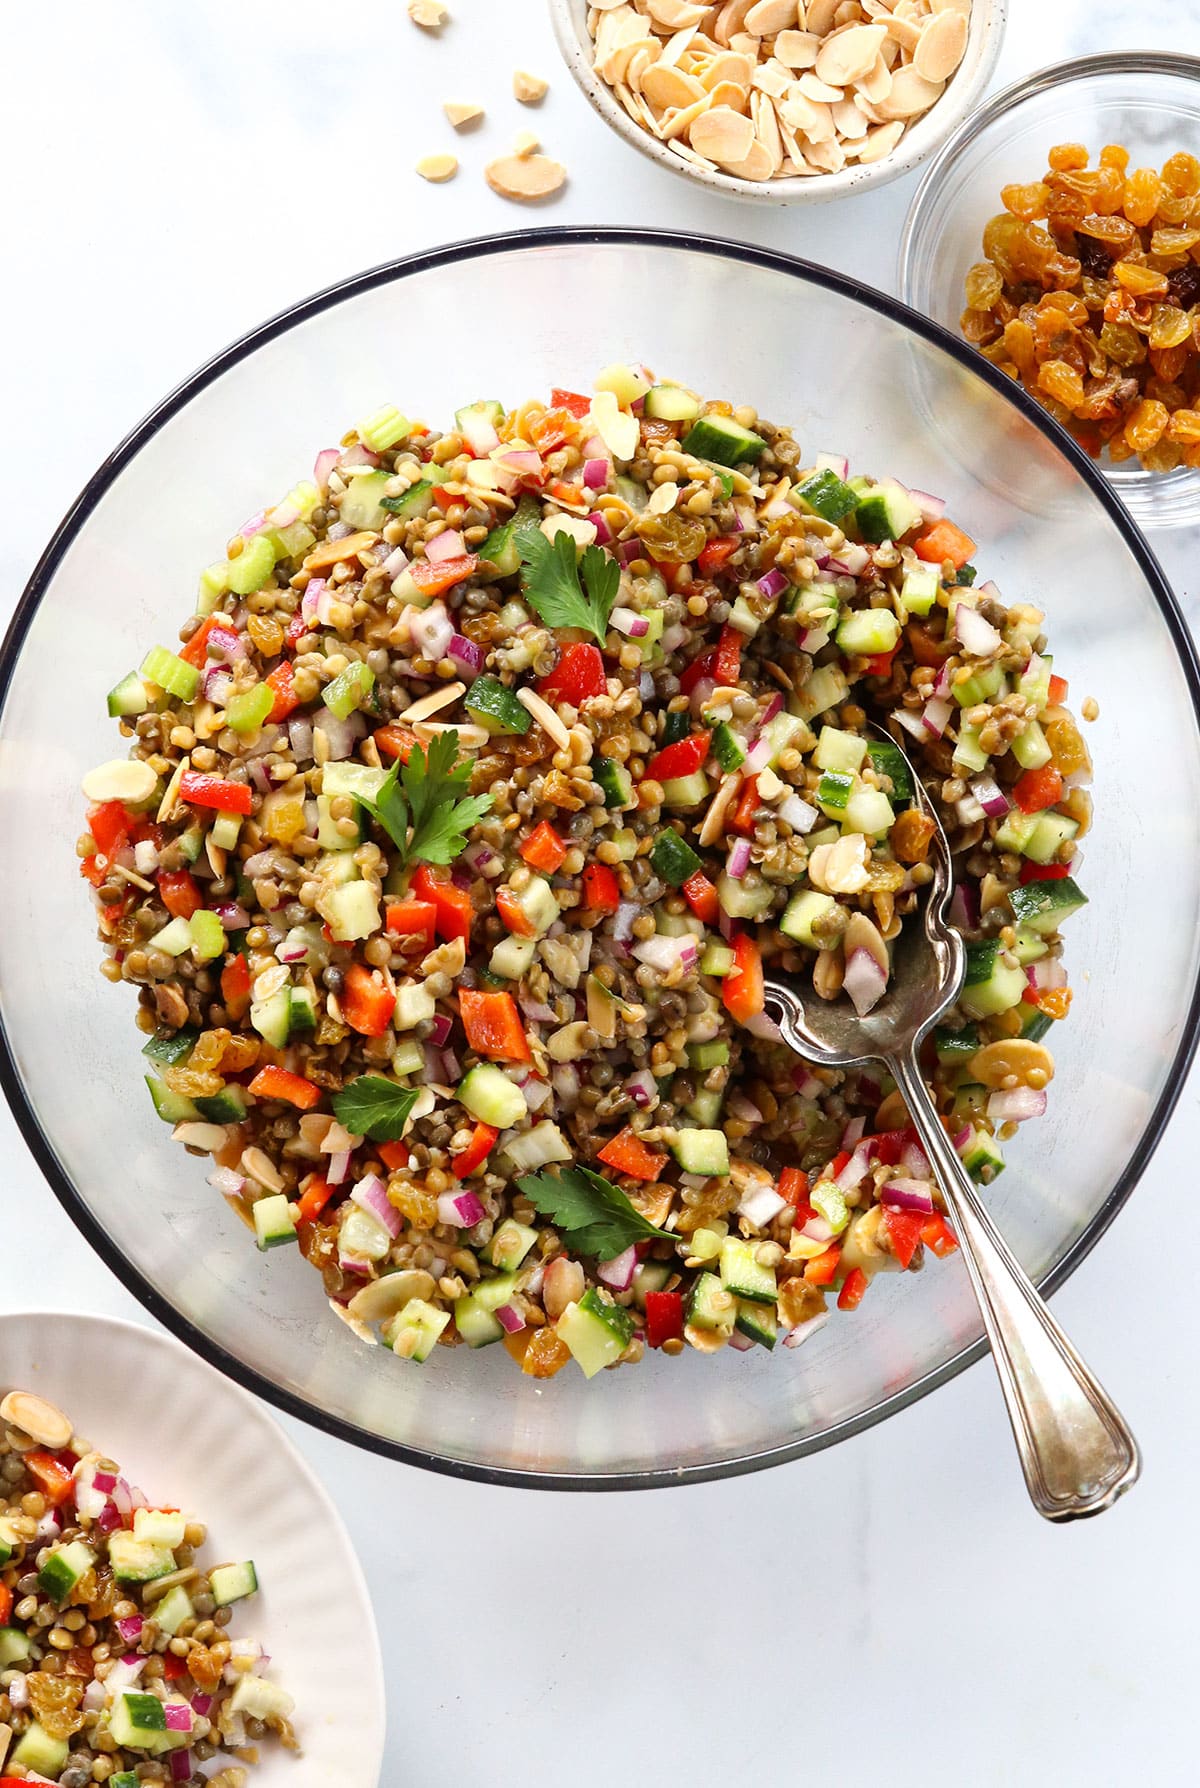 Lentil salad mixed together in a large glass bowl.